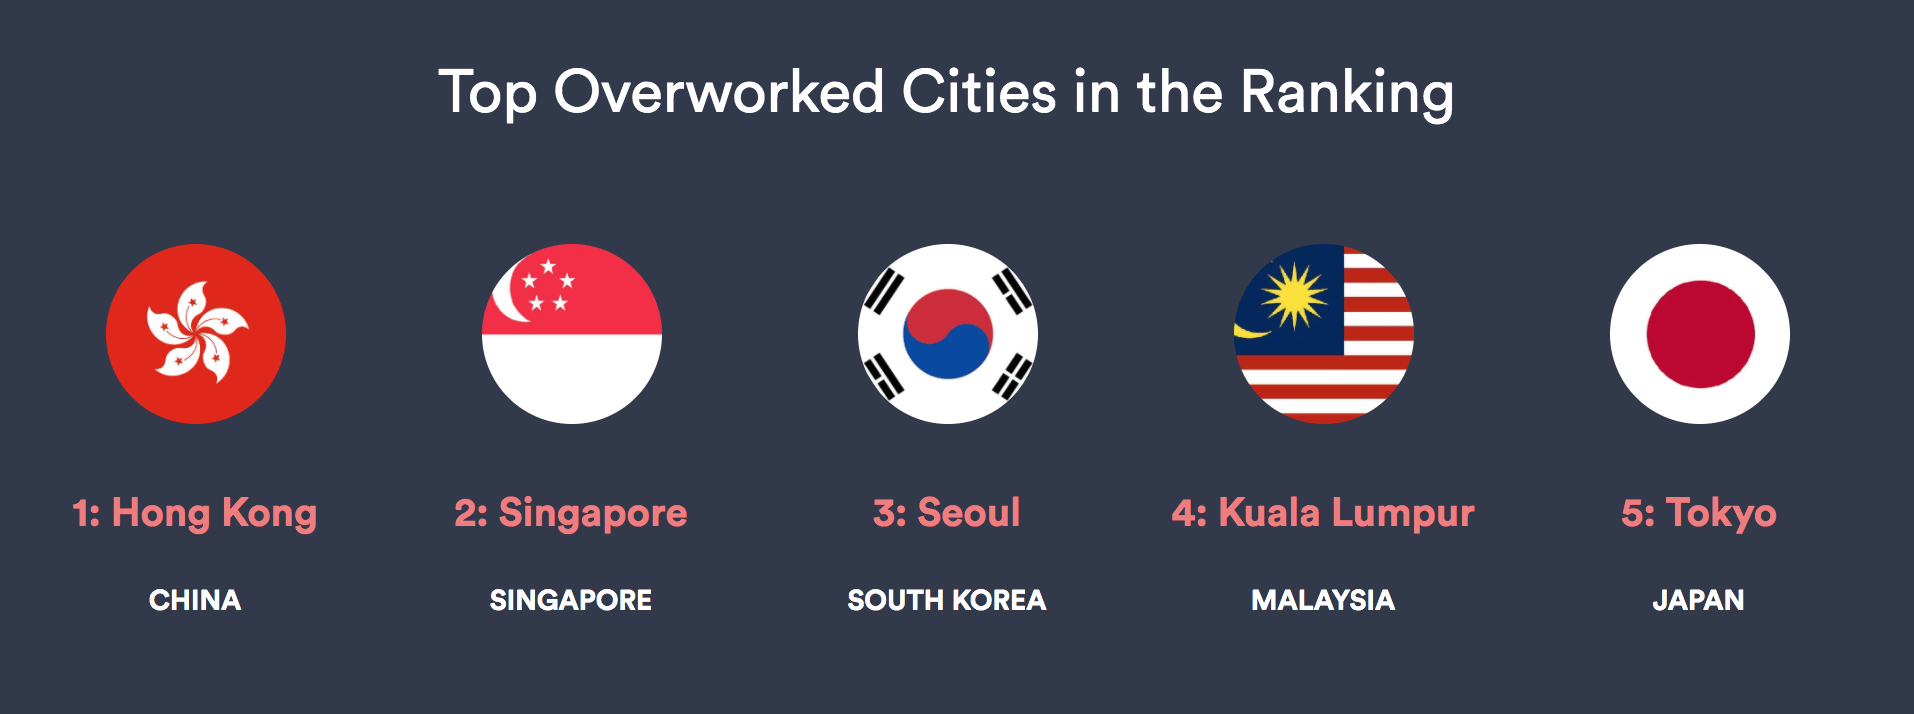 KL Ranks 4th Most Overworked City In Global Survey